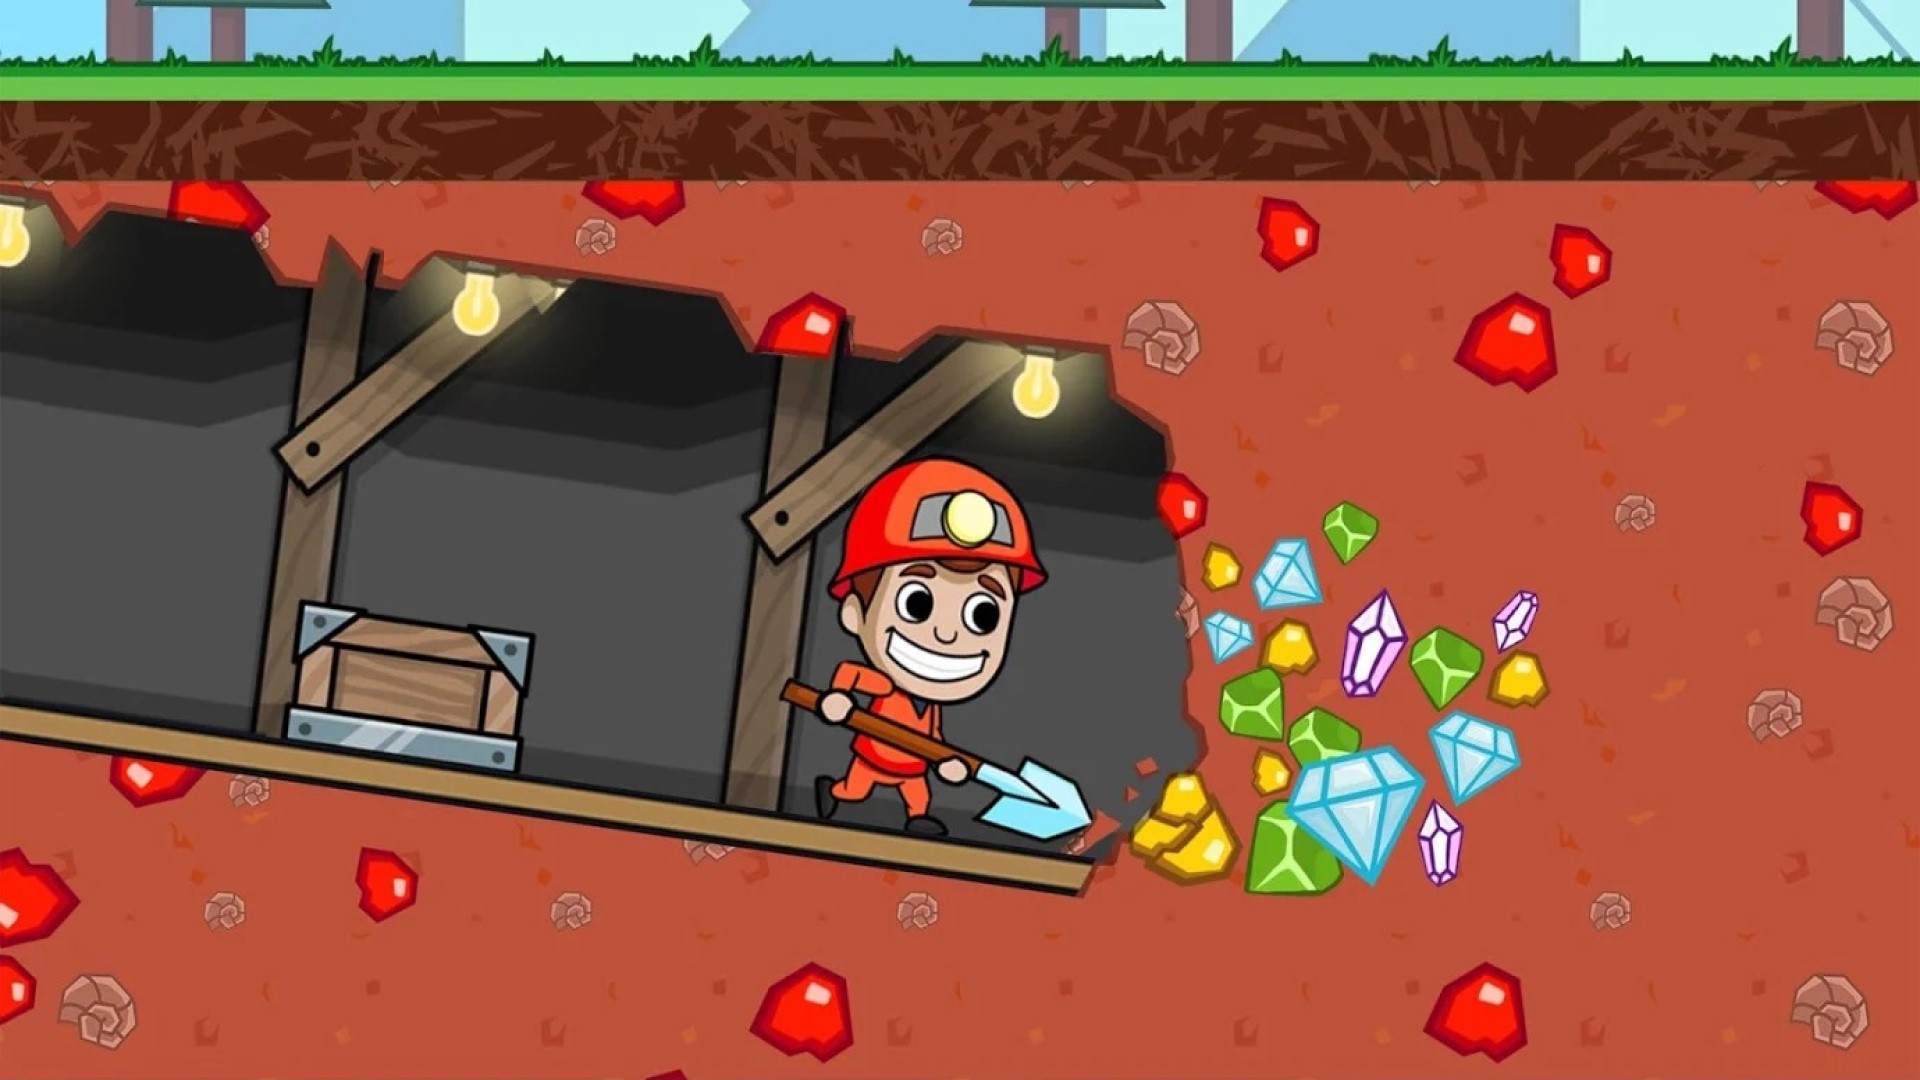 Check out Idle Mining Games Online